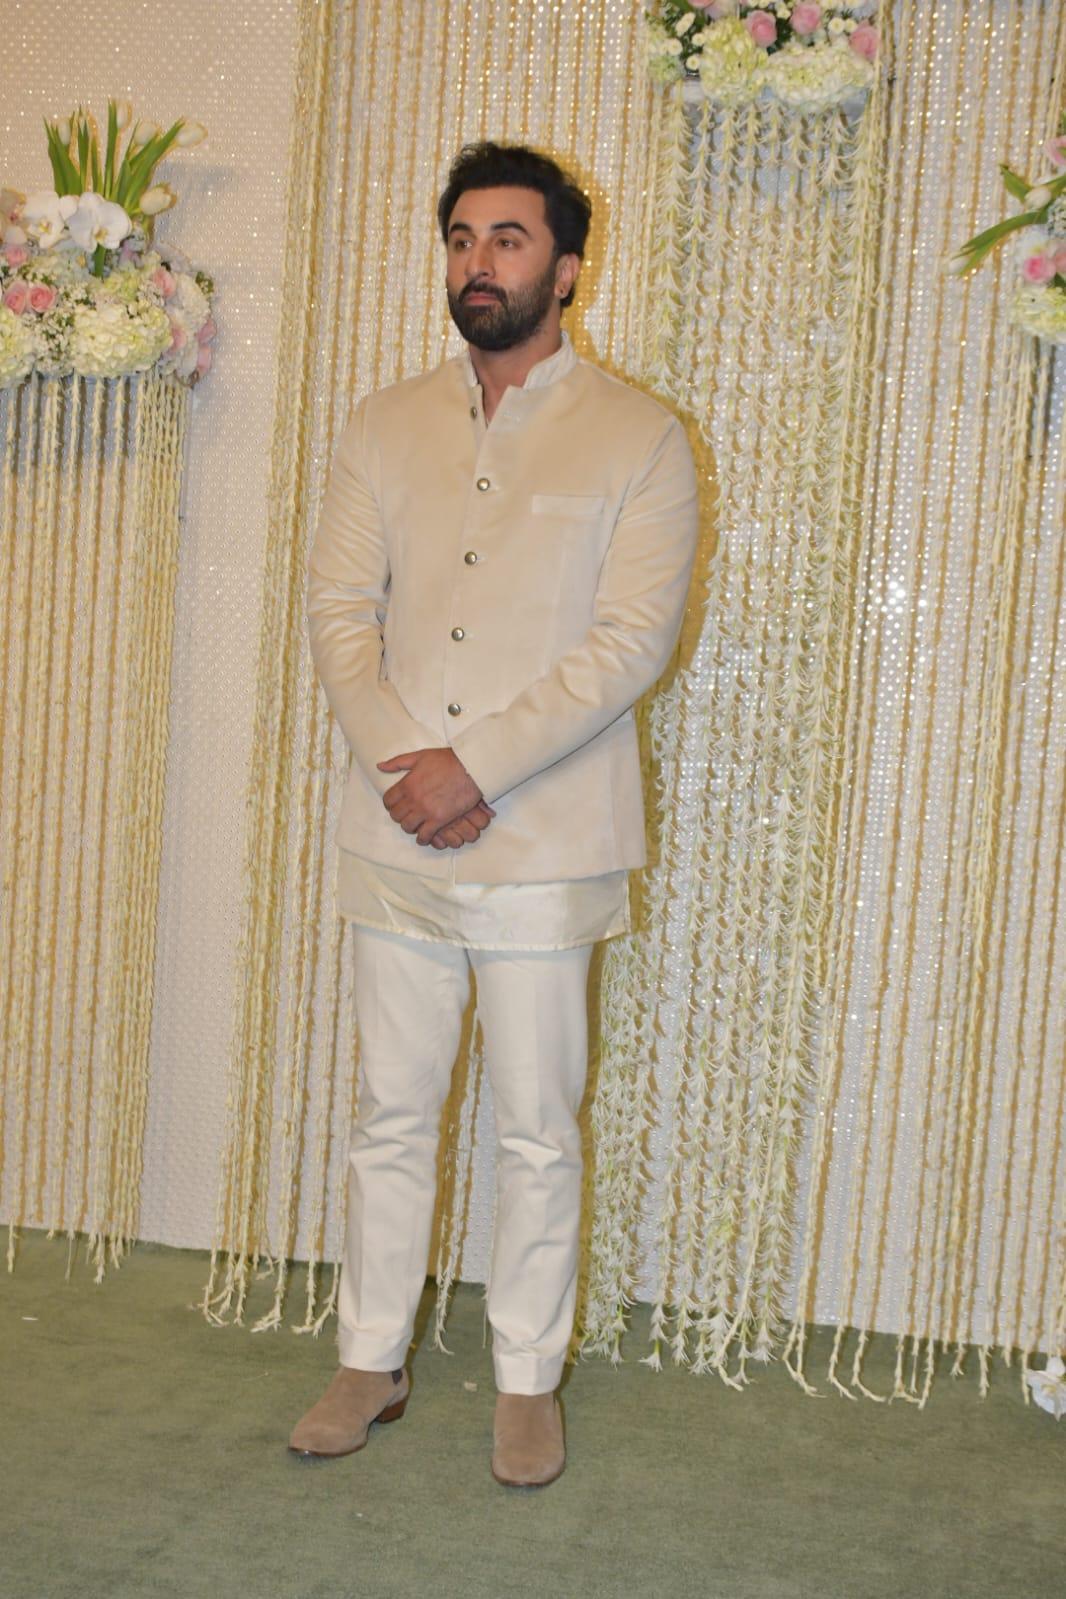 Ranbir Kapoor wore a stunning beige-coloured outfit to attend the reception of his friend Aamir's daughter. The Brahmastra actor looked like a rockstar